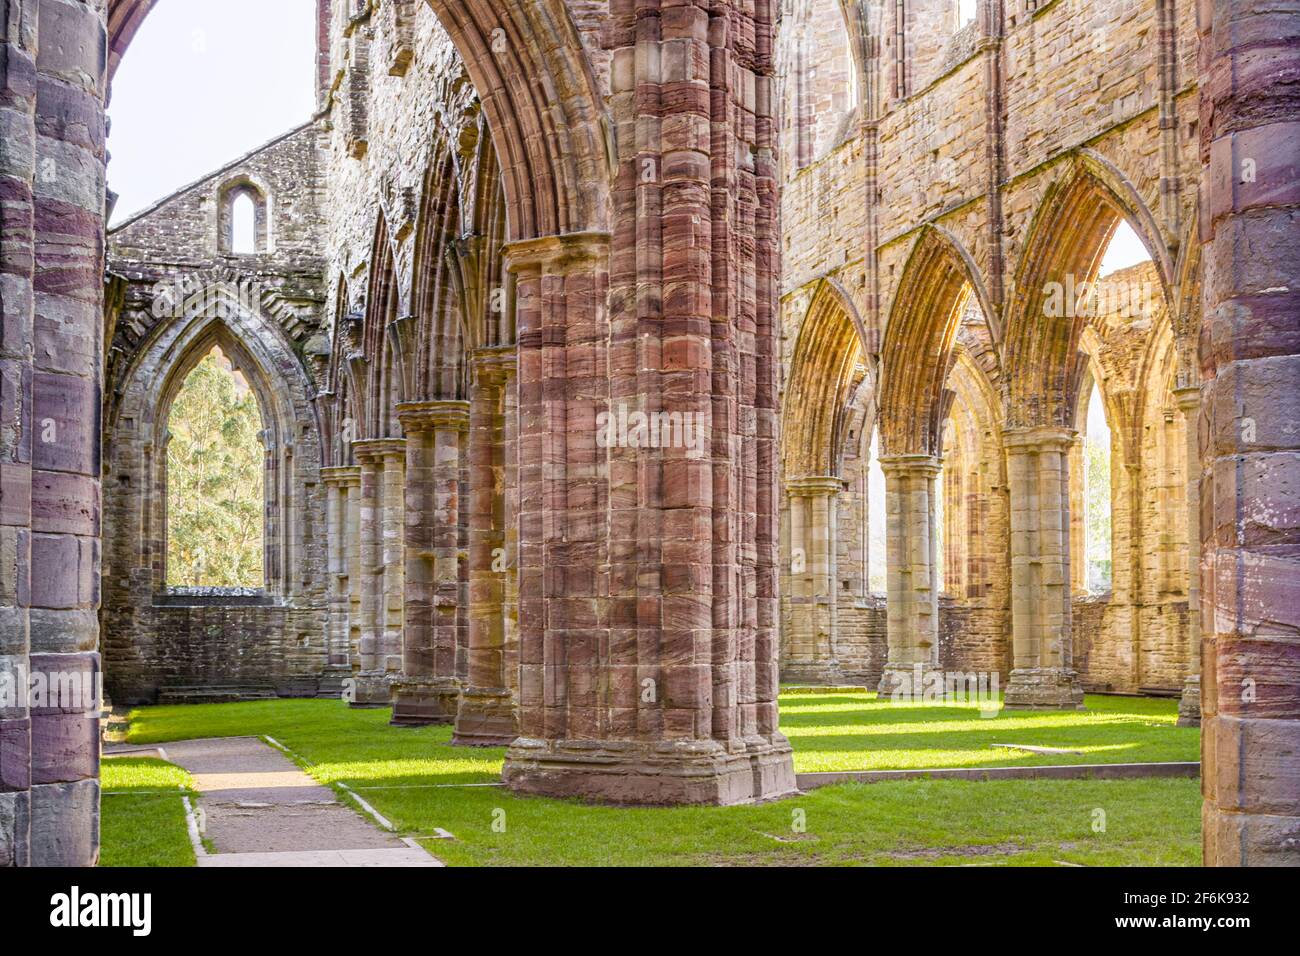 Tintern Abbey, a 12th century Cistercian abbey on the banks of the River Wye at Tintern, Monmouthshire, Wales UK Stock Photo